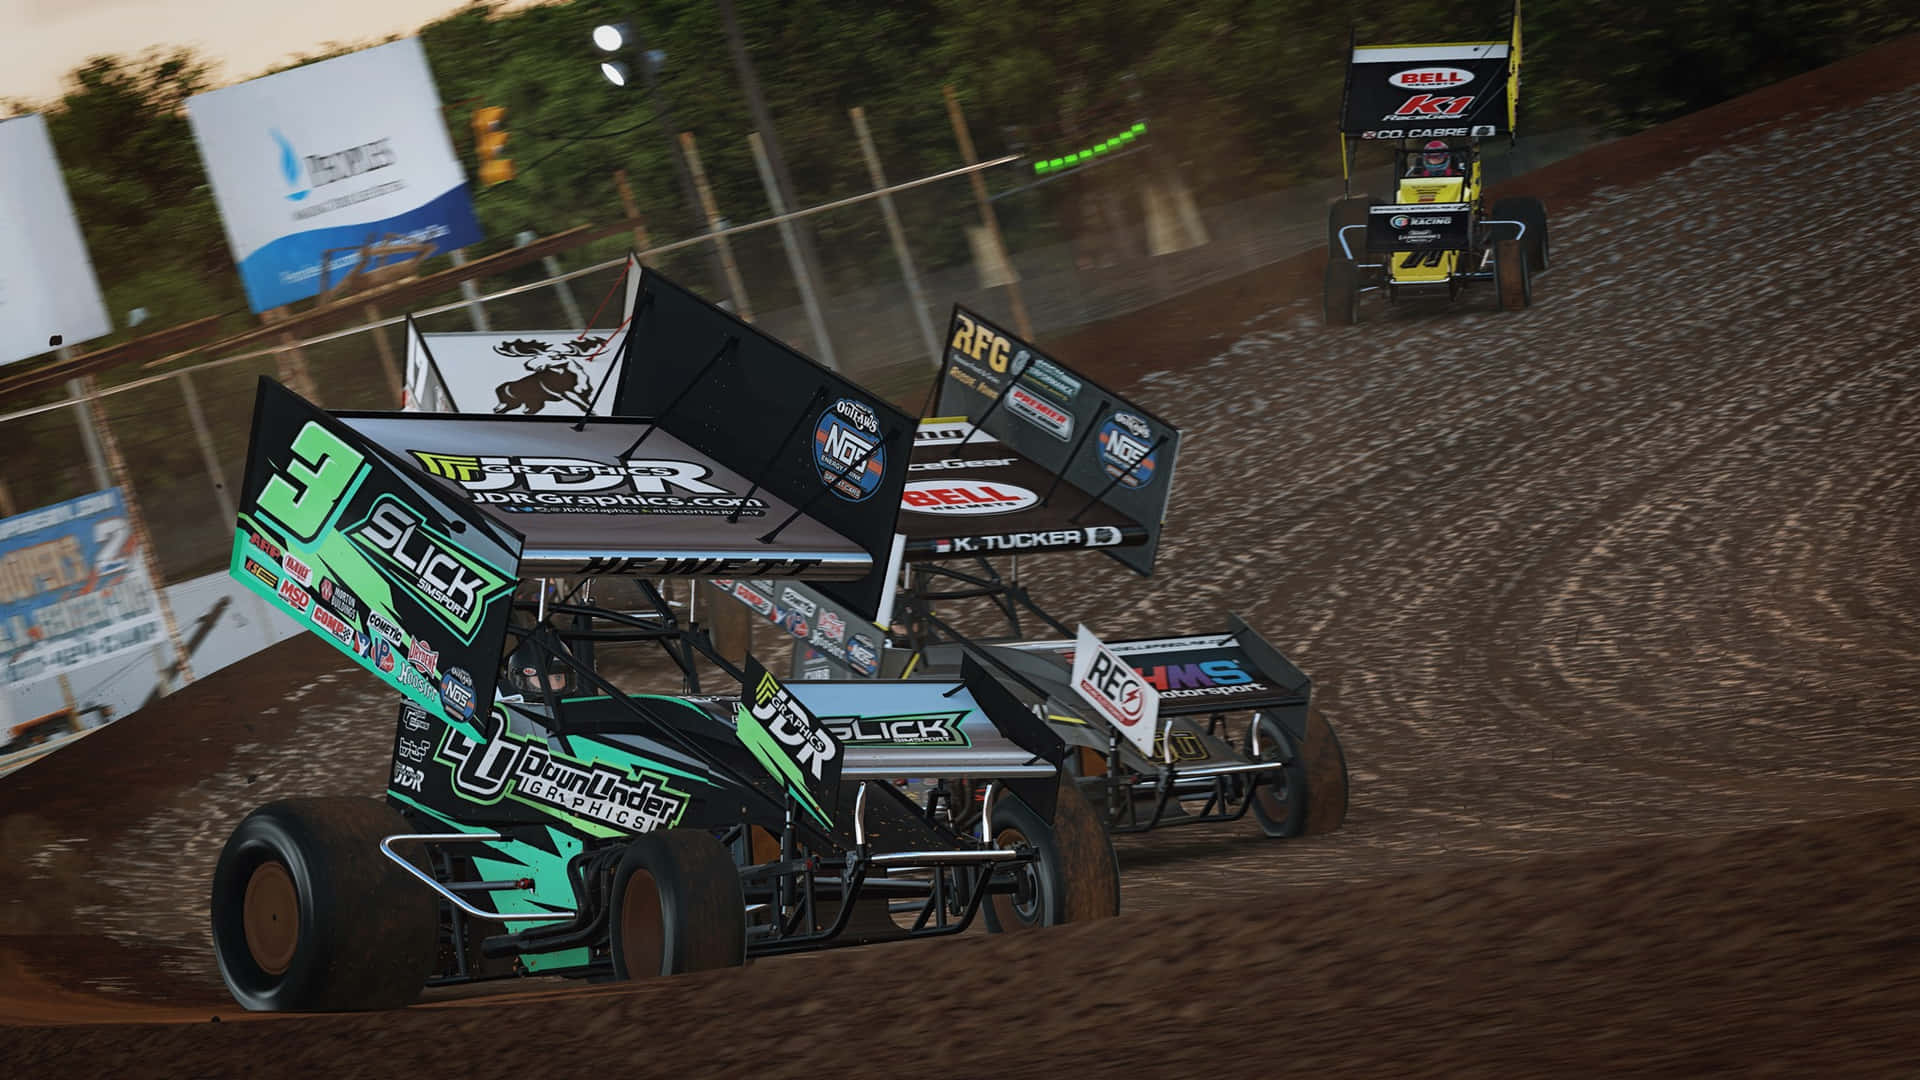 A Dirt Track With Dirt Cars Racing Down The Track Wallpaper